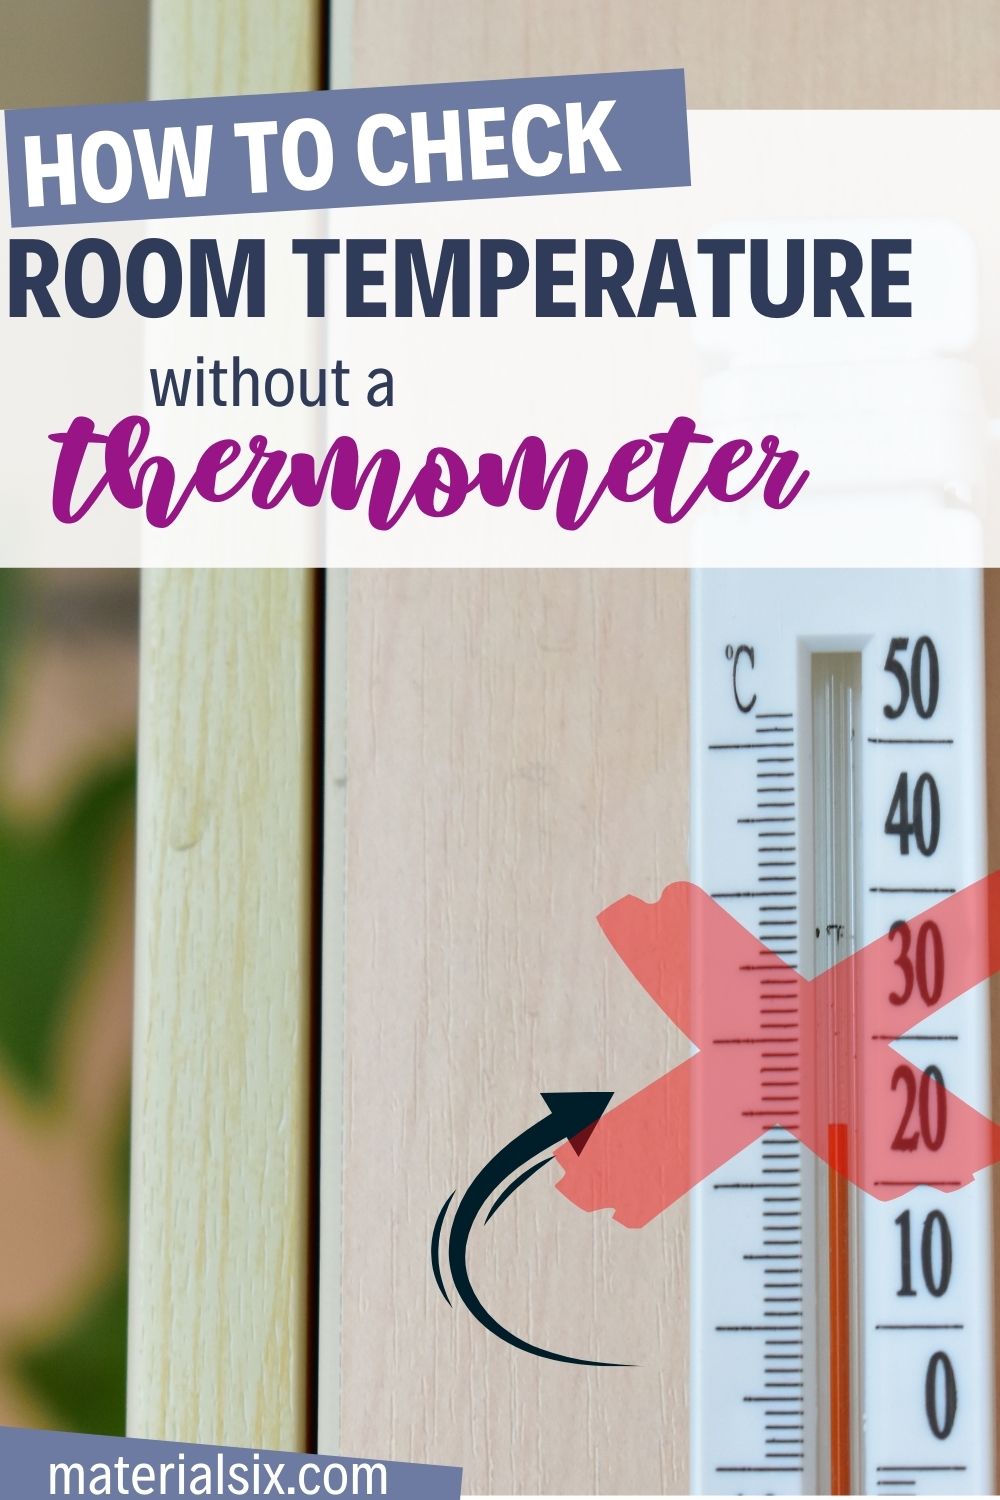 how to check room temperature without thermometer